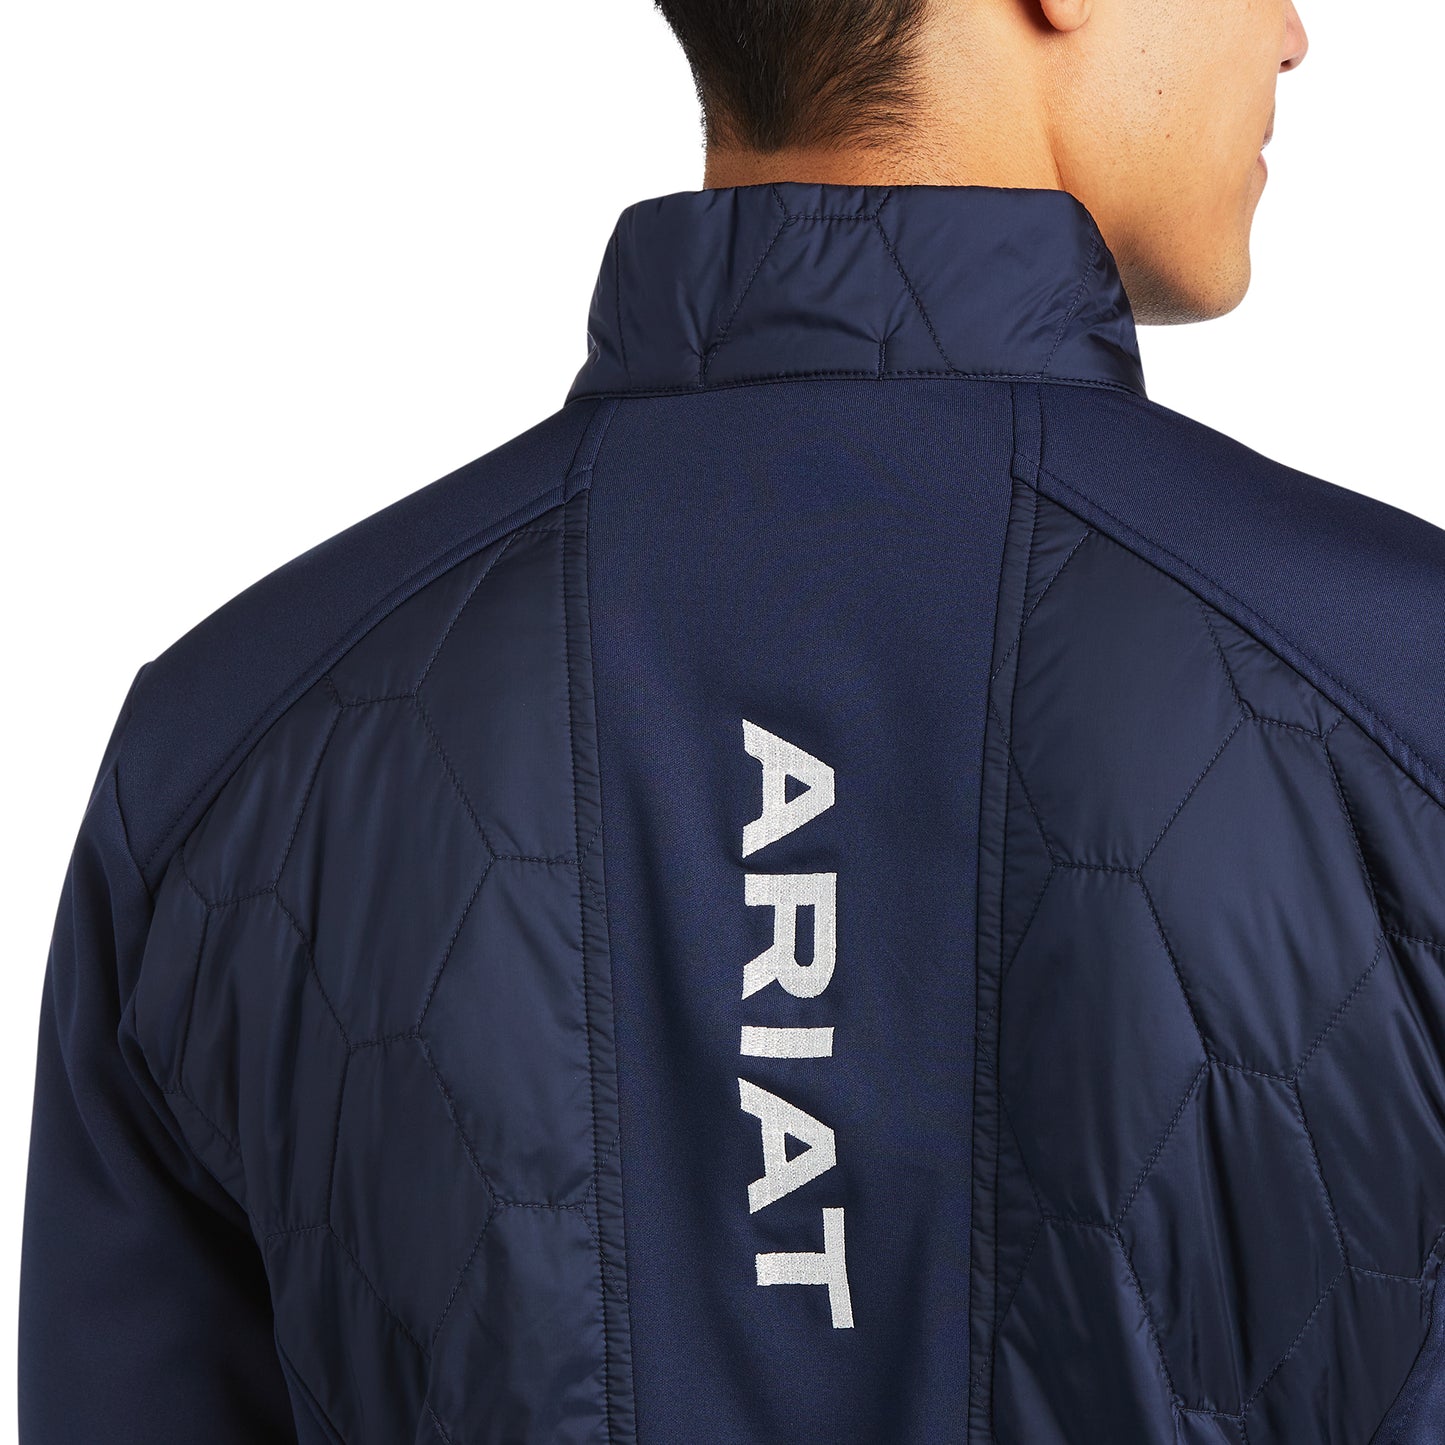 Ariat® Men's Fusion Navy Team Insulated Jacket 10039217